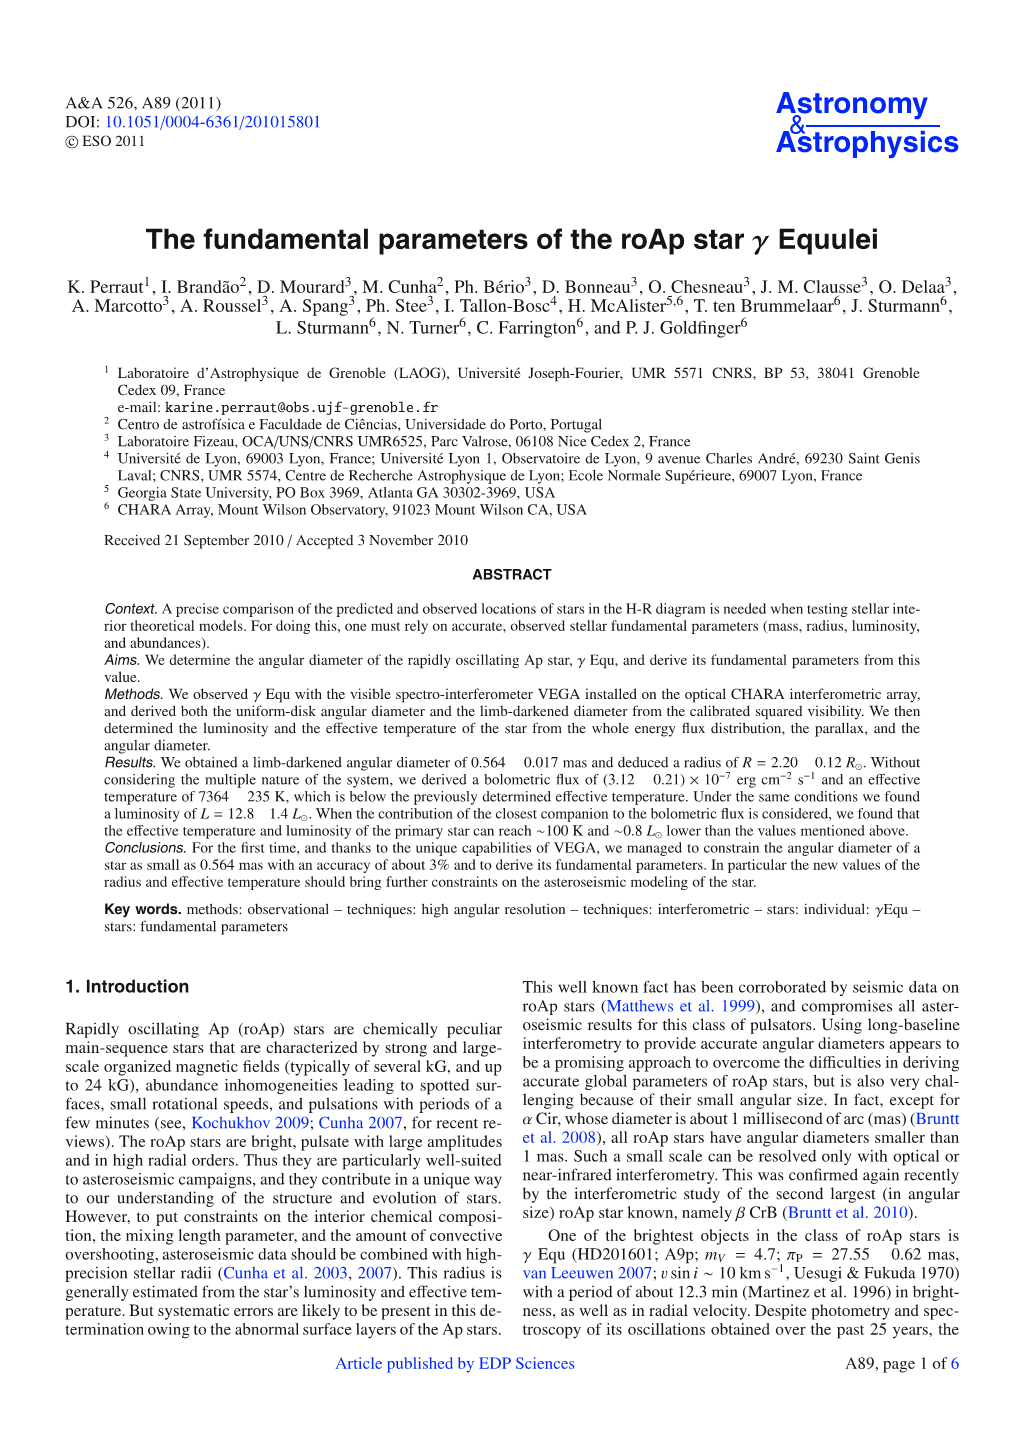 The Fundamental Parameters of the Roap Star Γ Equulei